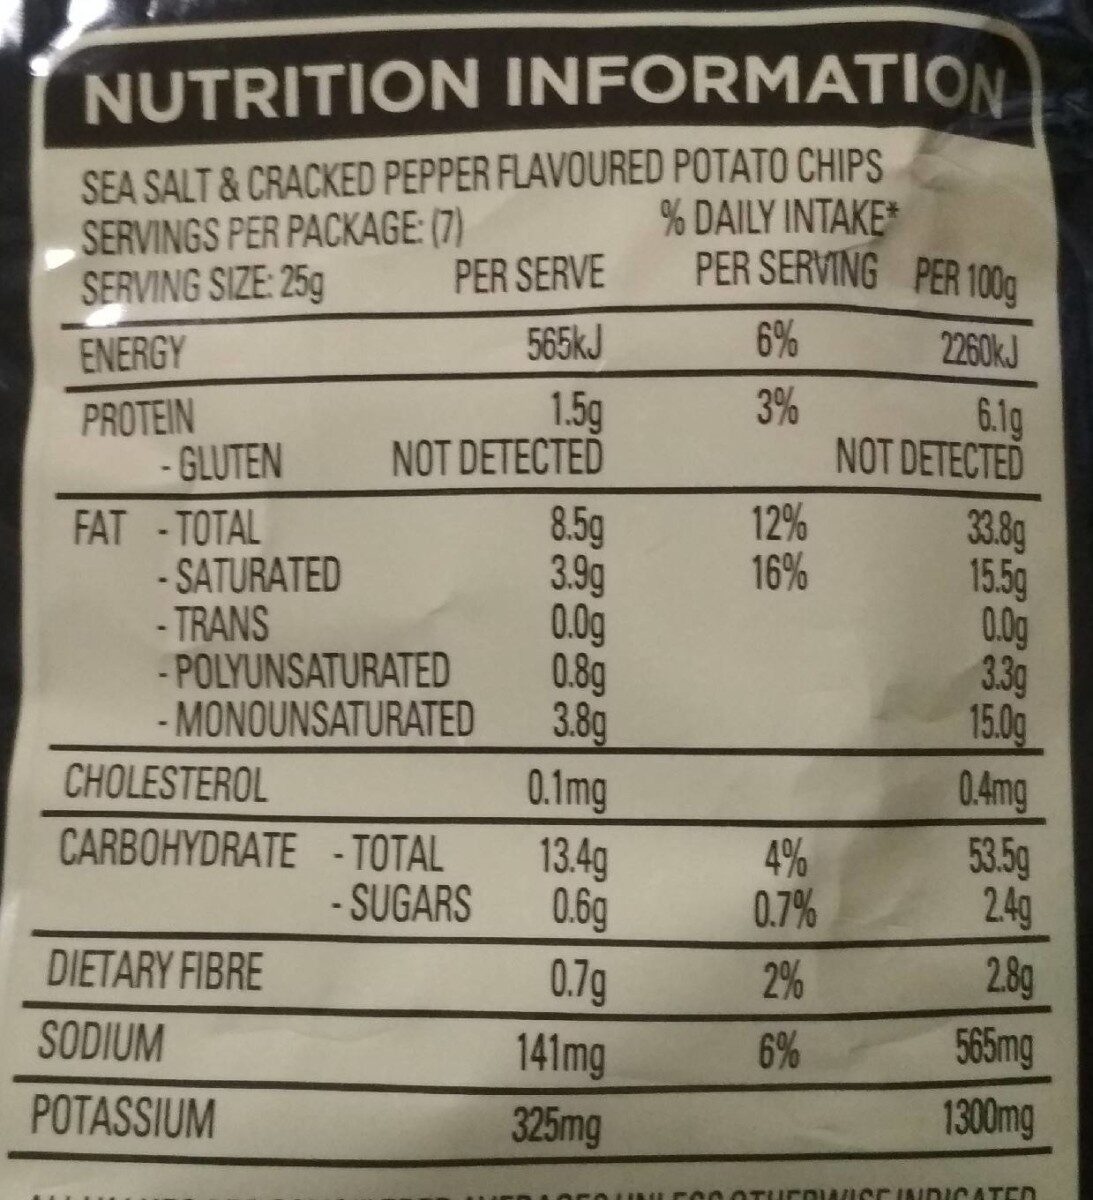 Sea salt & cracked pepper chips - Nutrition facts